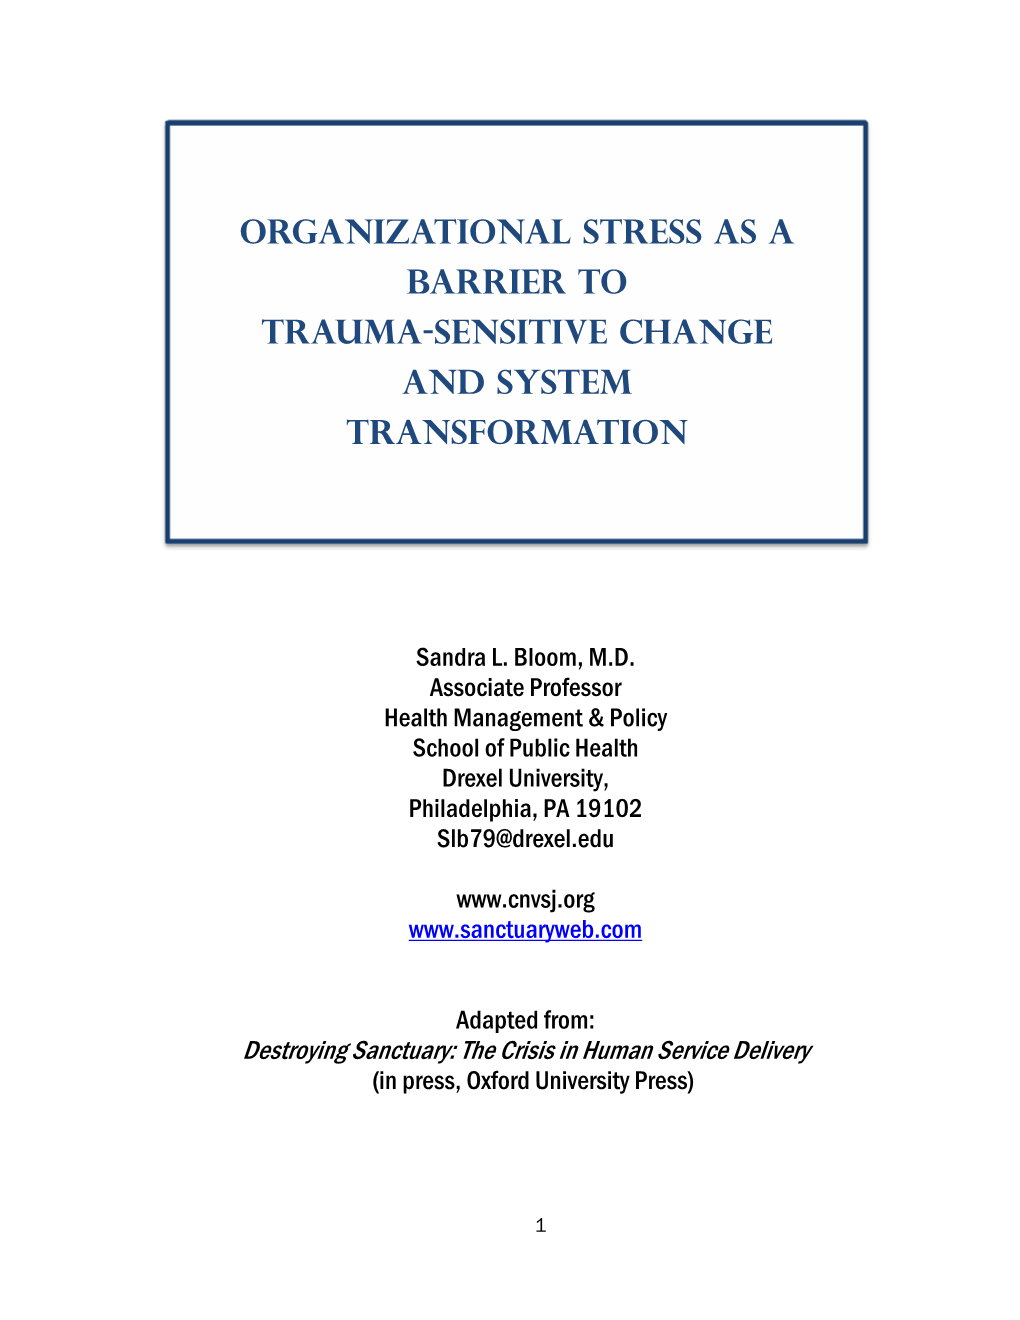 Organizational Stress As a Barrier to Trauma-Sensitive Change and System Transformation